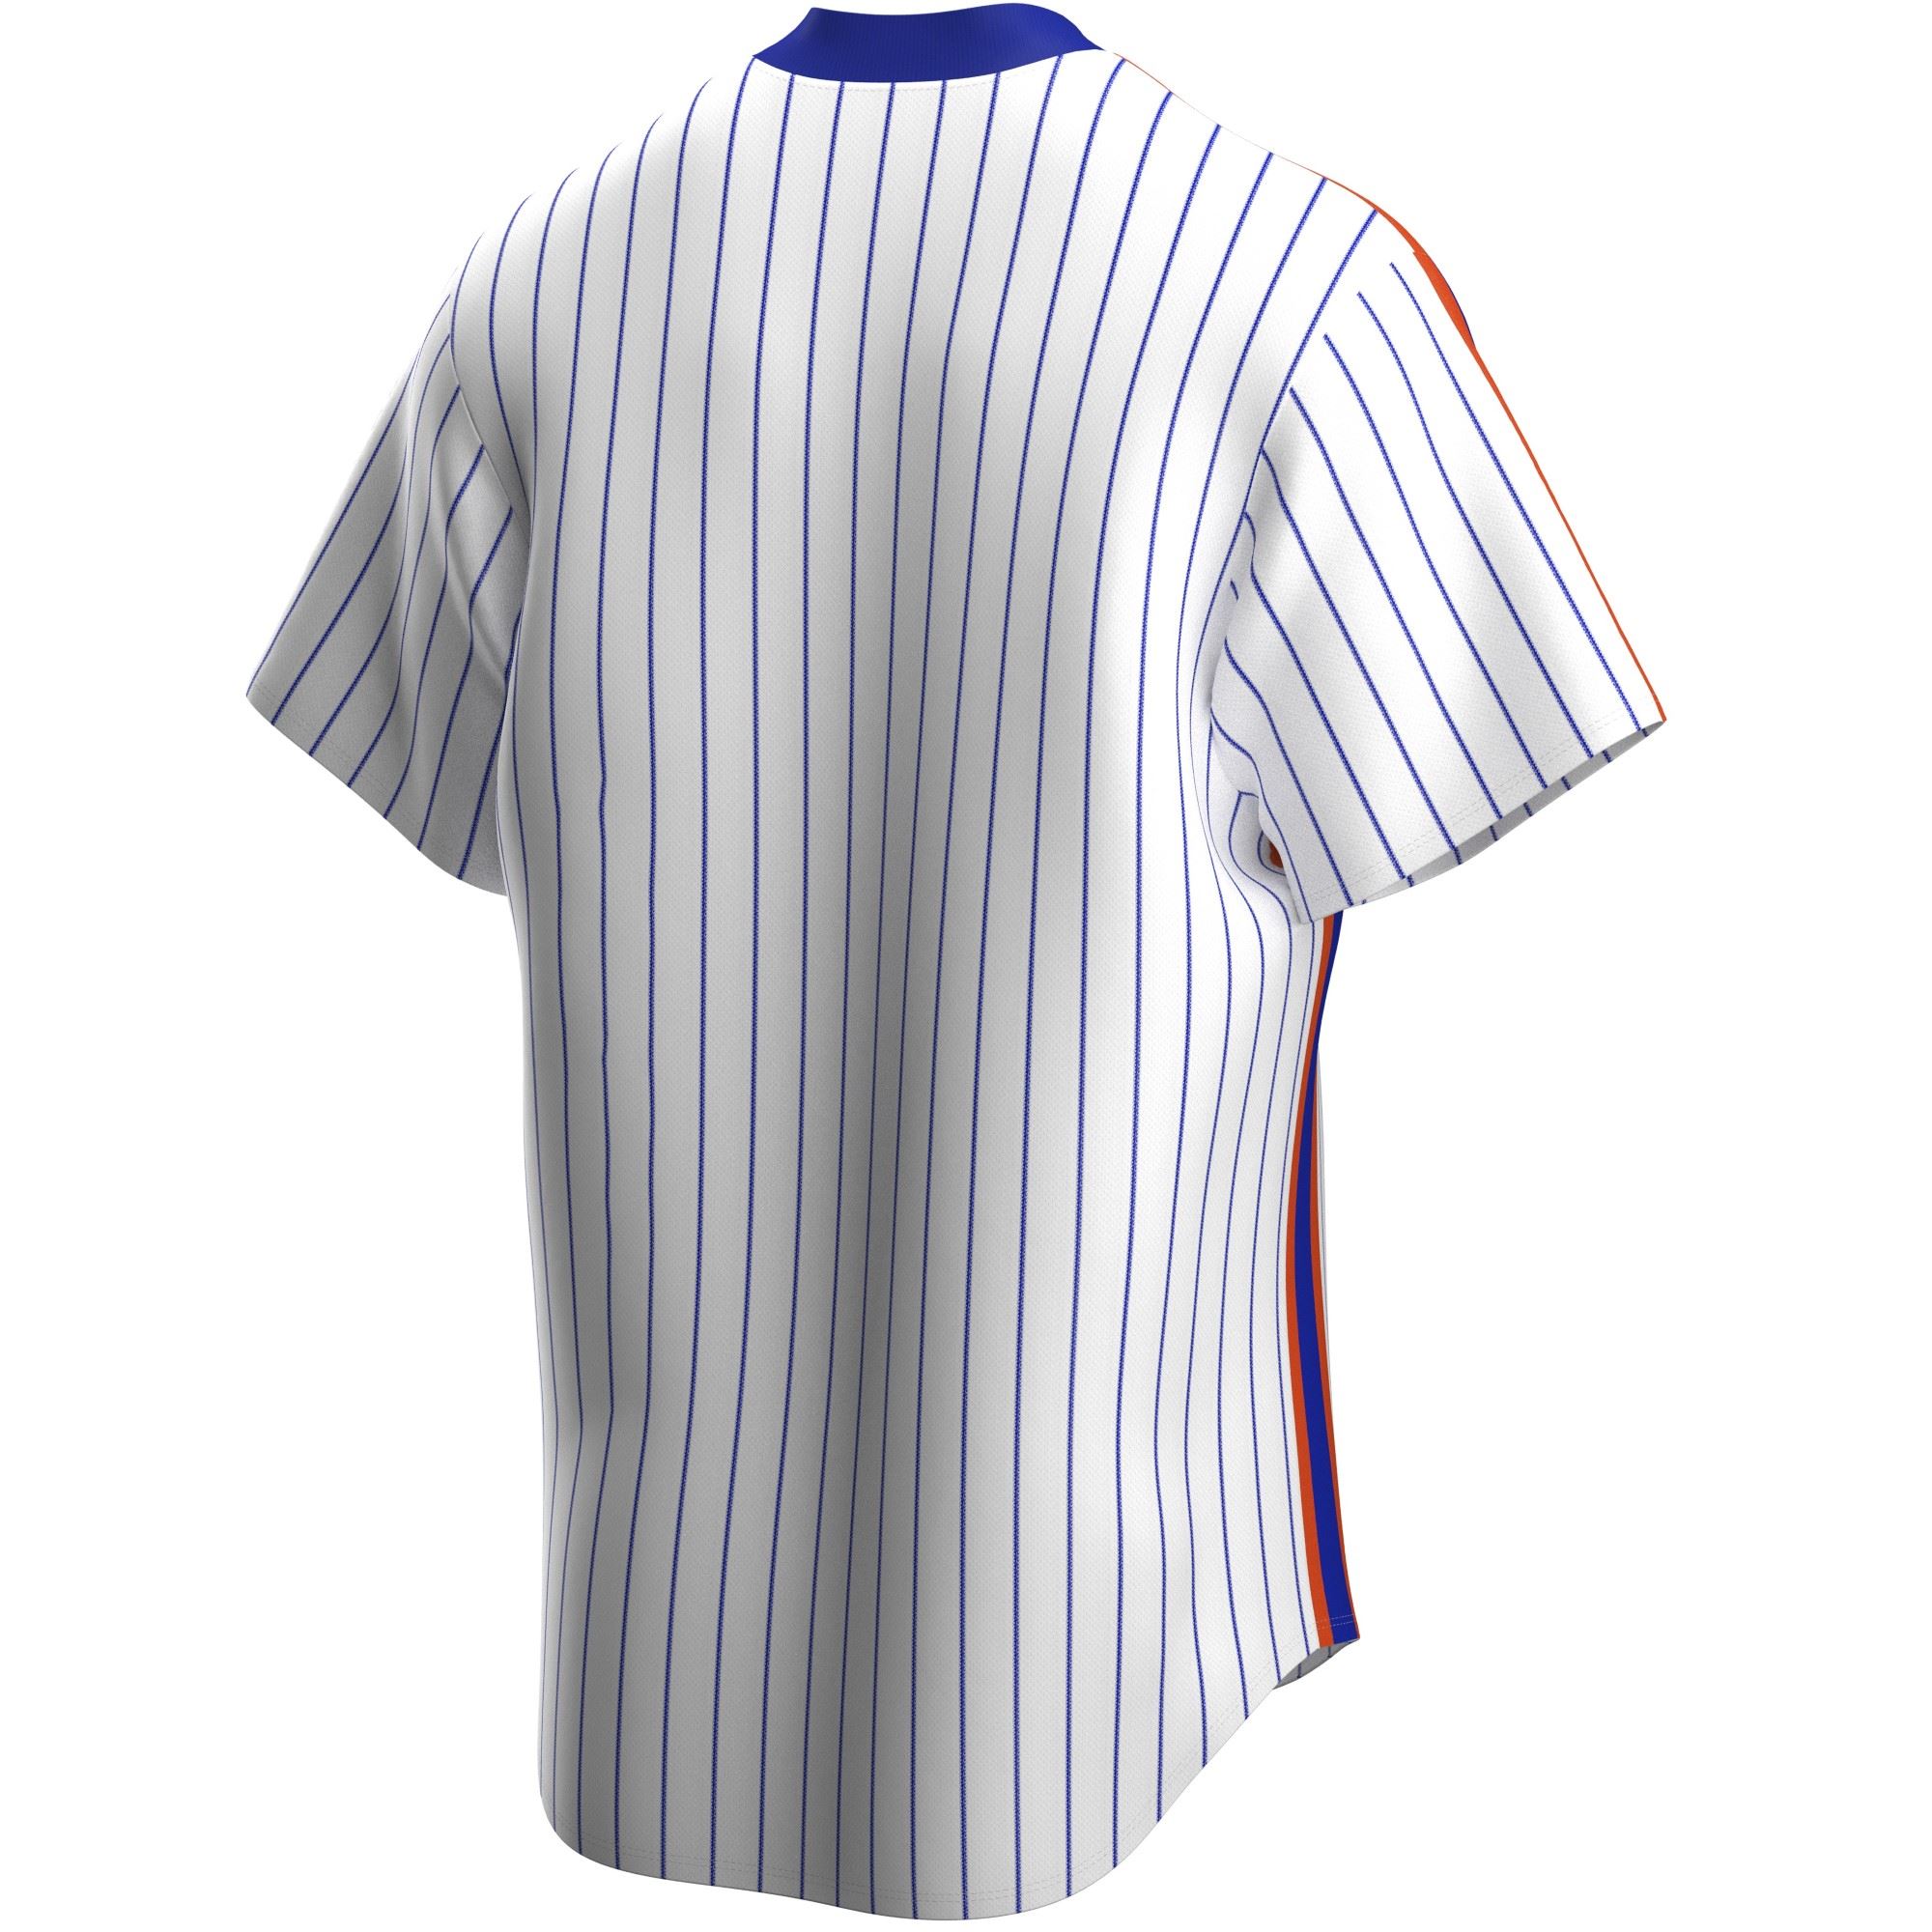 New York Mets Official MLB Cooperstown Jersey White Nike